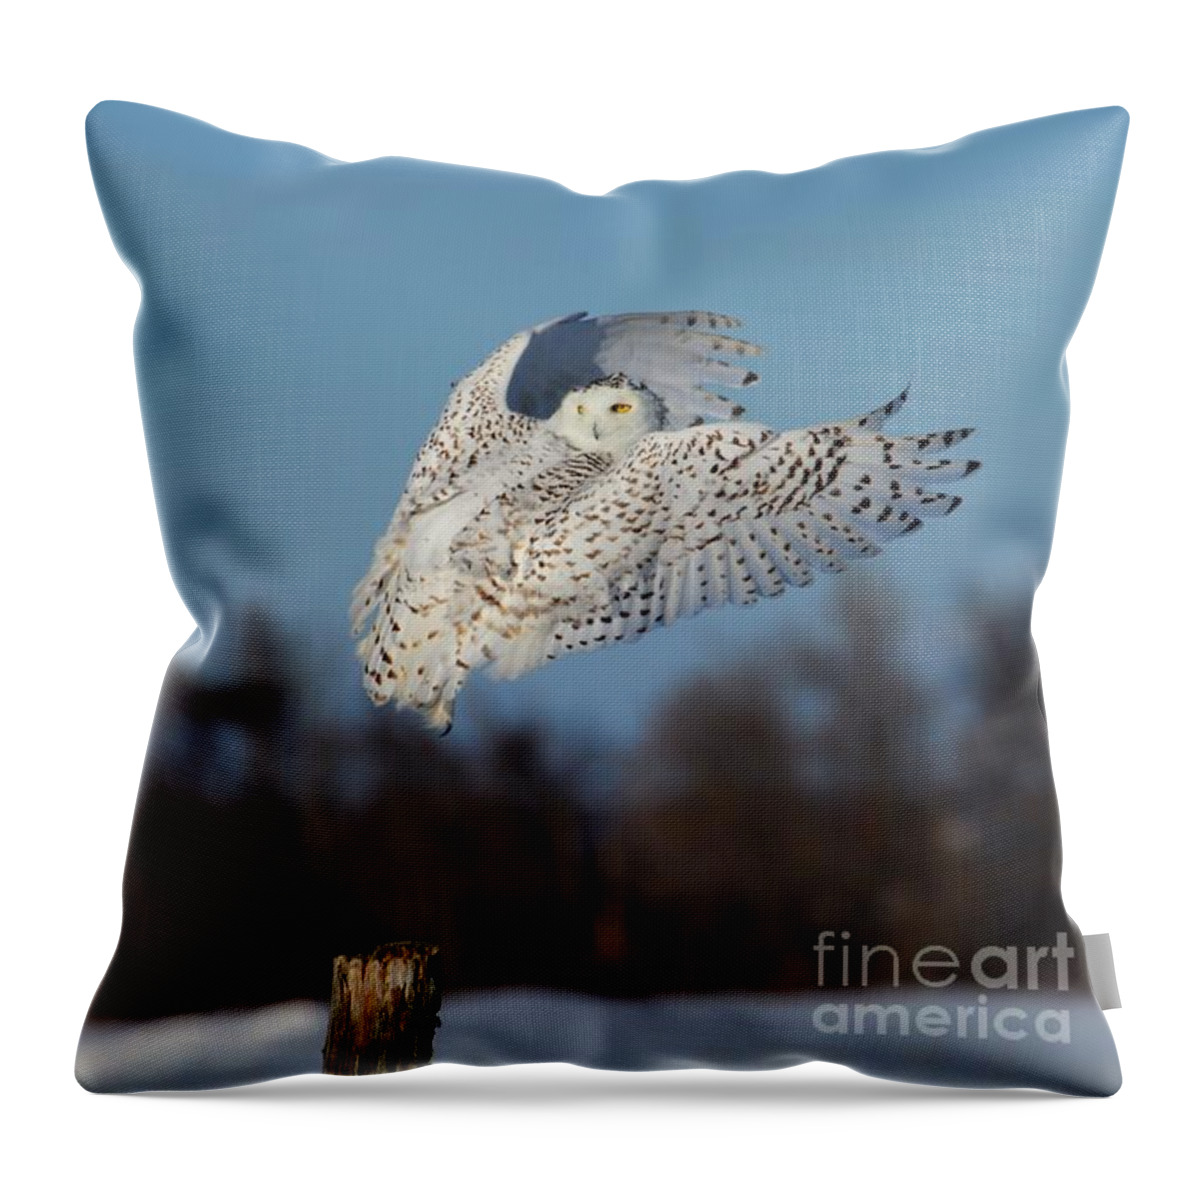 Flight Throw Pillow featuring the photograph Hindsight by Heather King